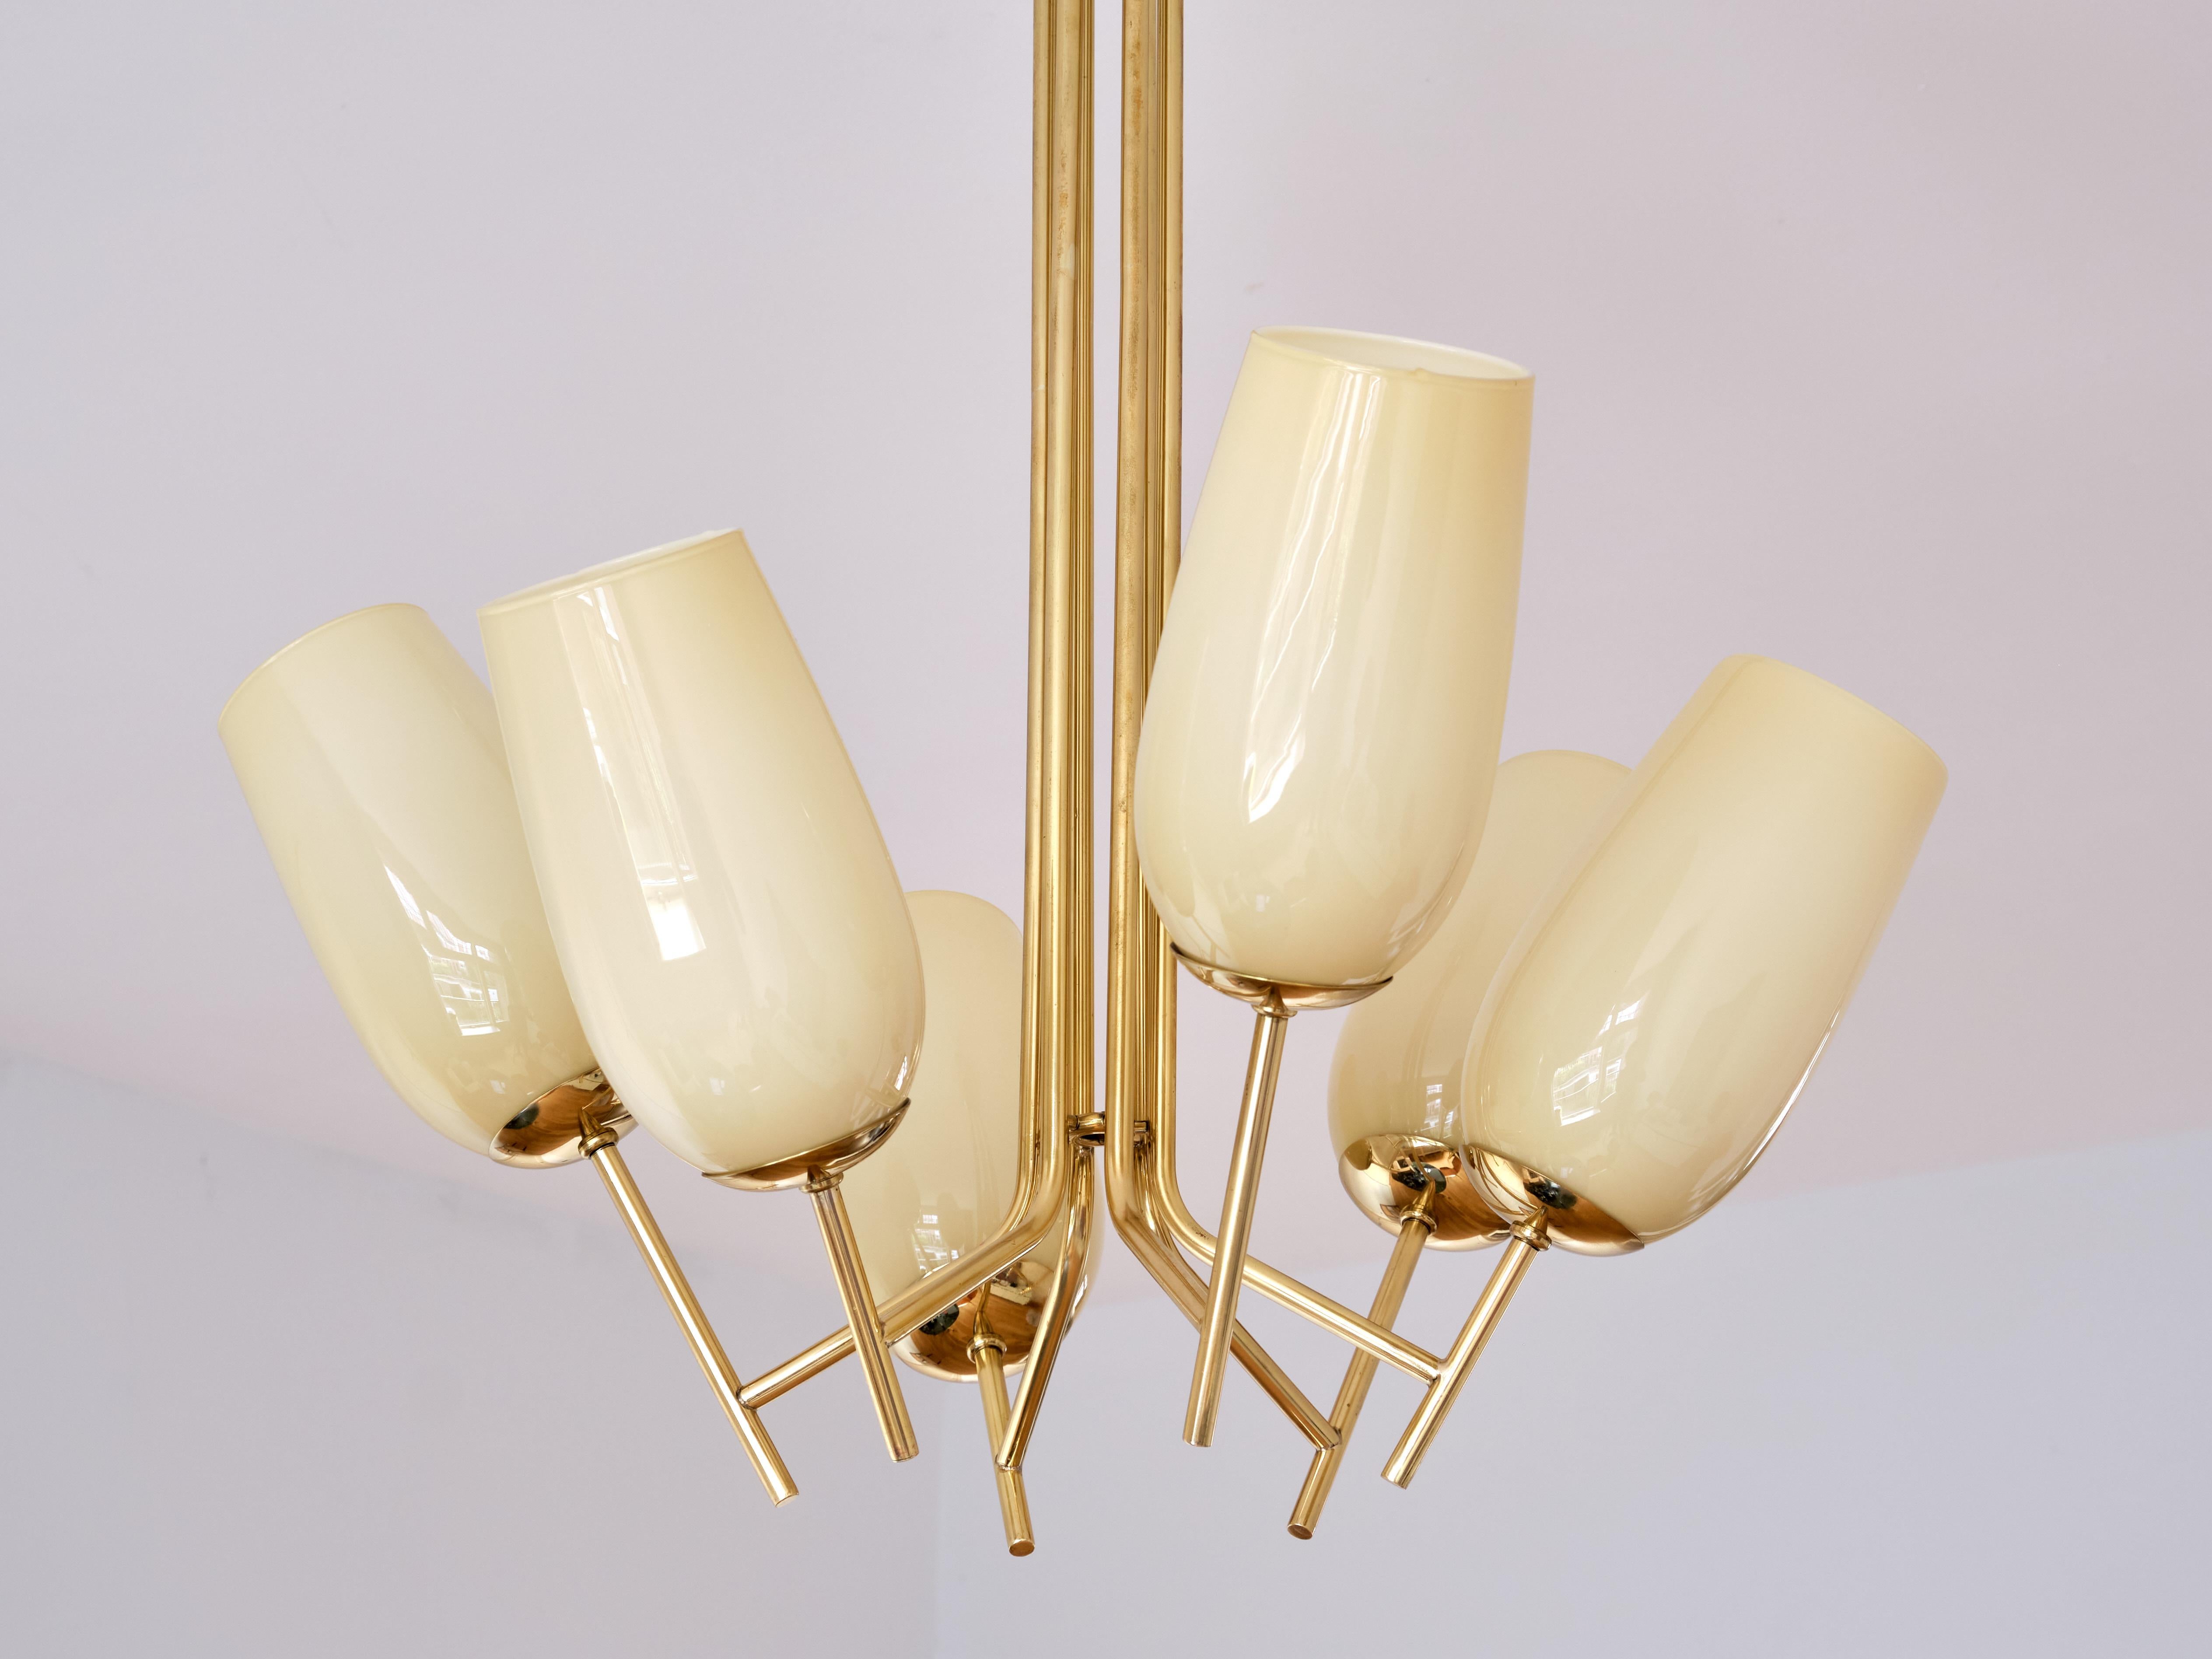 Finnish Paavo Tynell Six Arm Chandelier in Brass and Amber Glass, Taito, Finland, 1940s